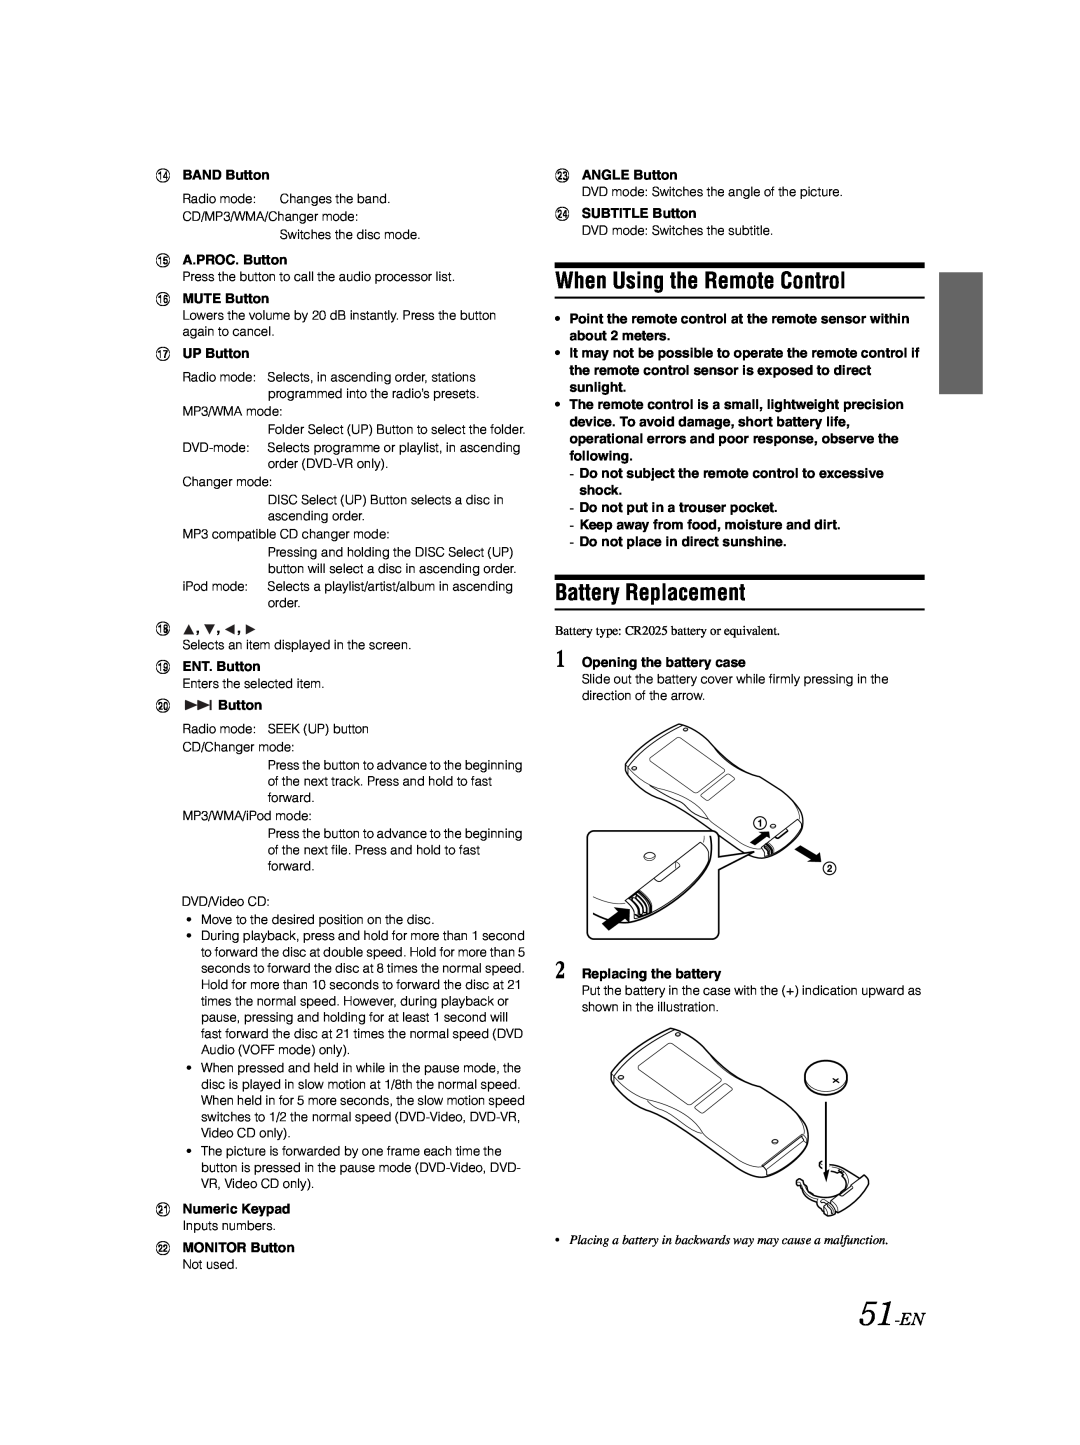 Alpine DVA-9861Ri owner manual When Using the Remote Control, Battery Replacement, 51-EN 